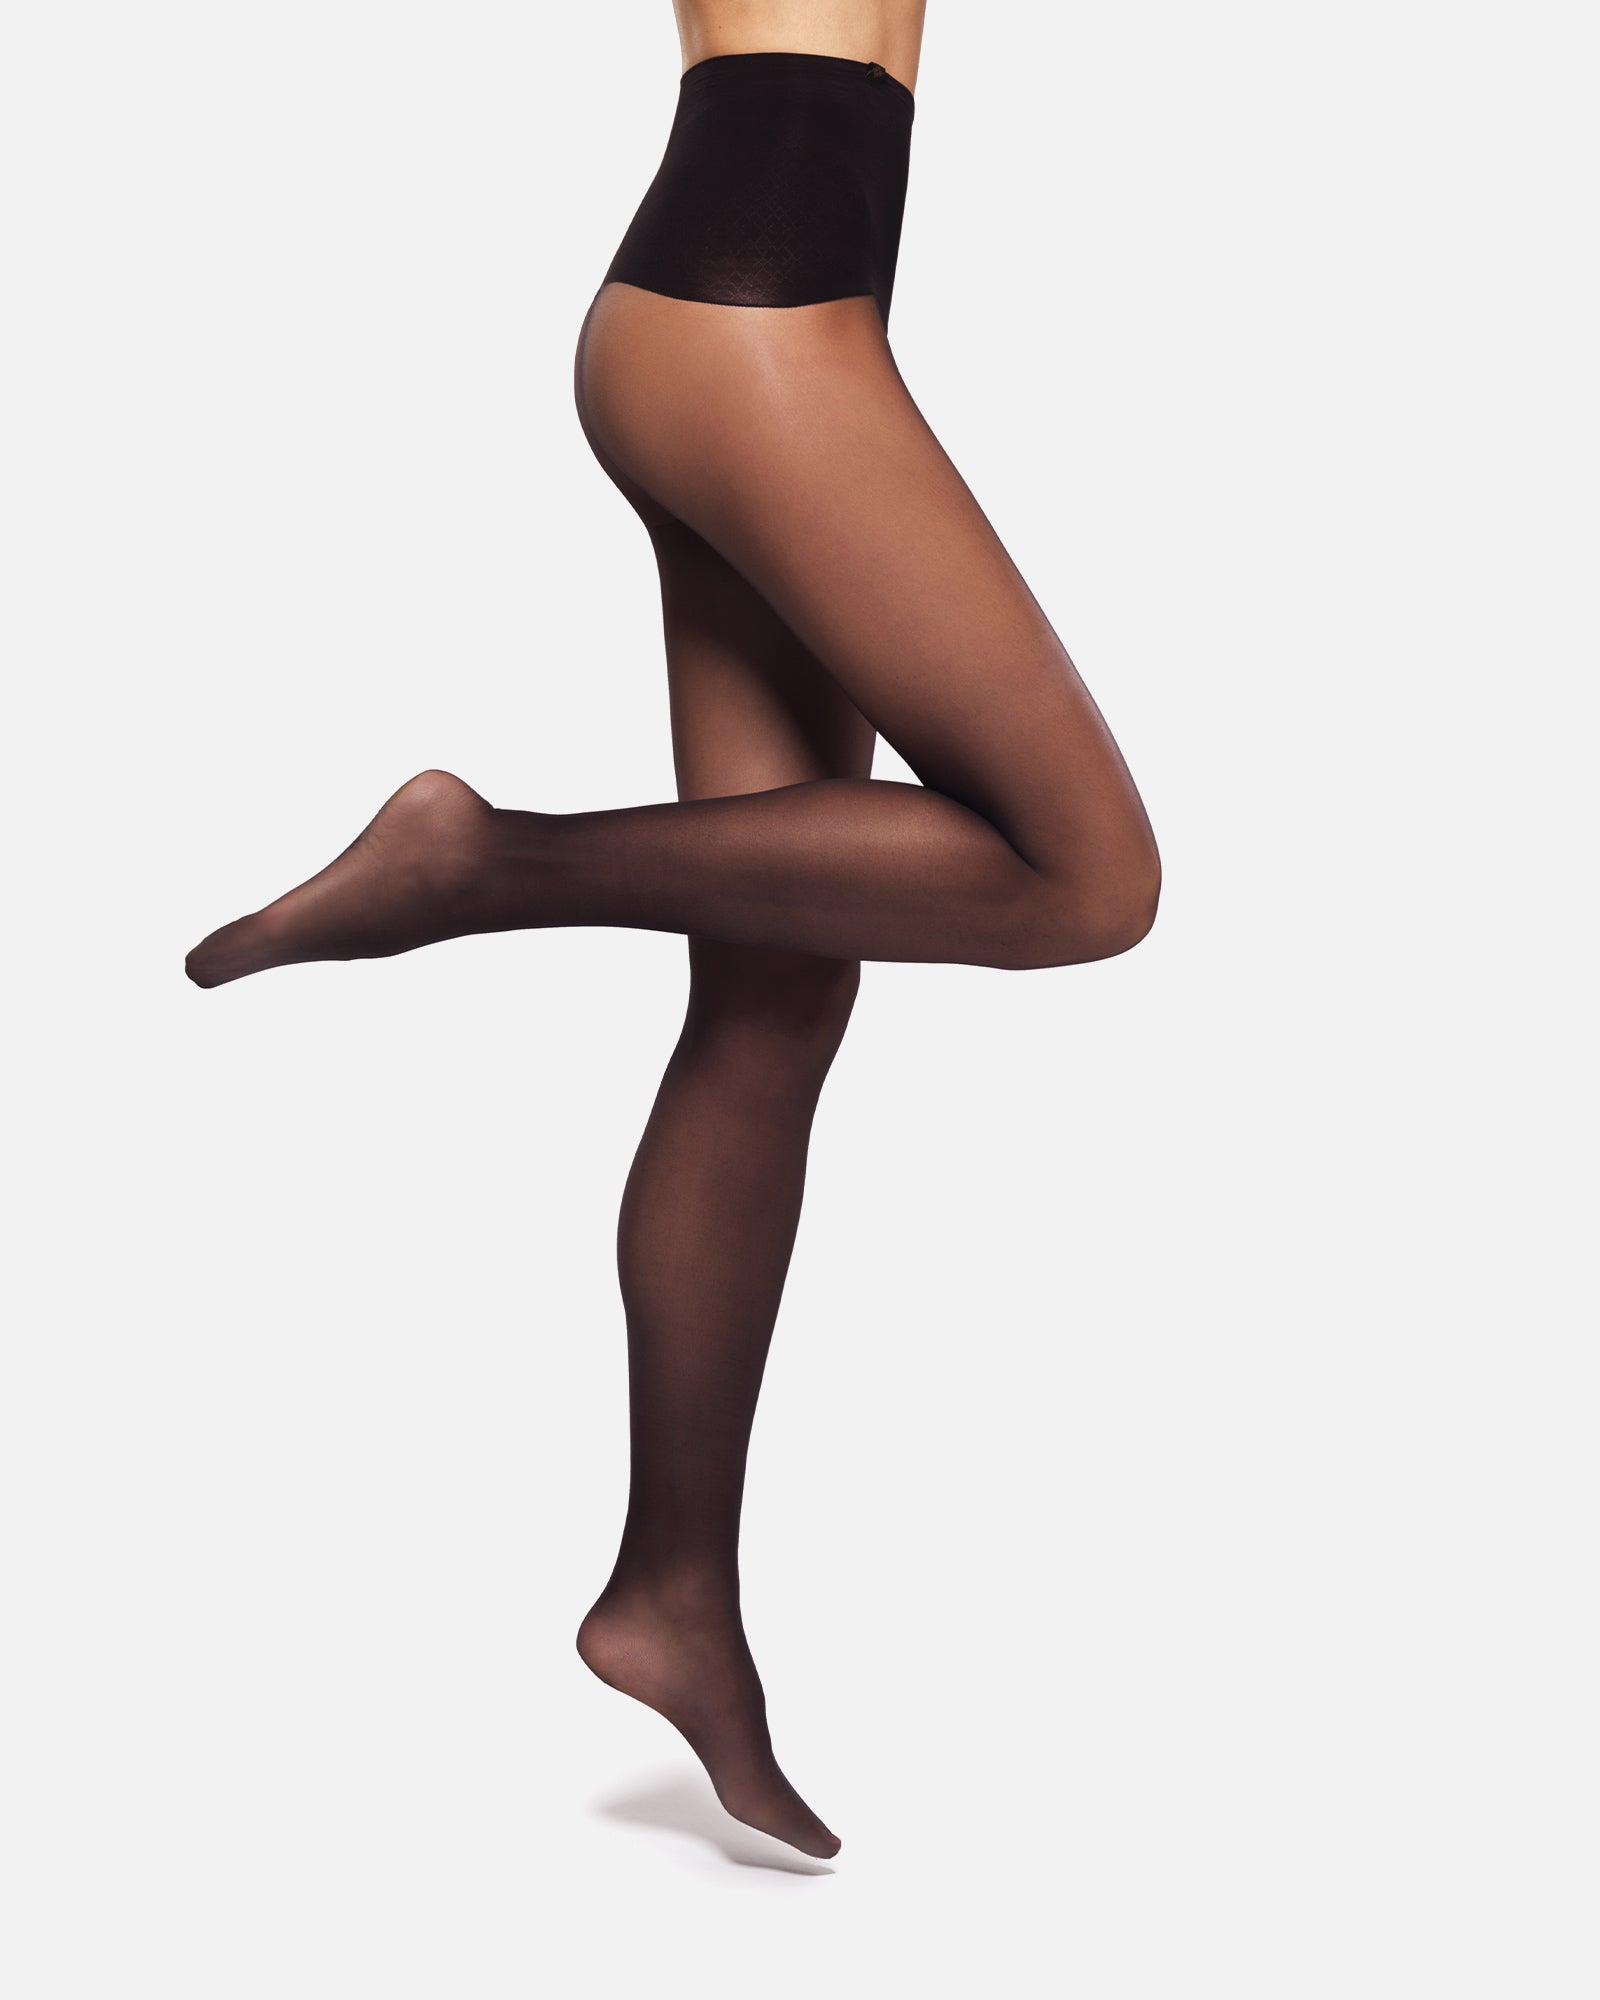 Hedoine The Bold | 20 Denier Sustainable Hosiery supplied by Hedoine GBP32.00